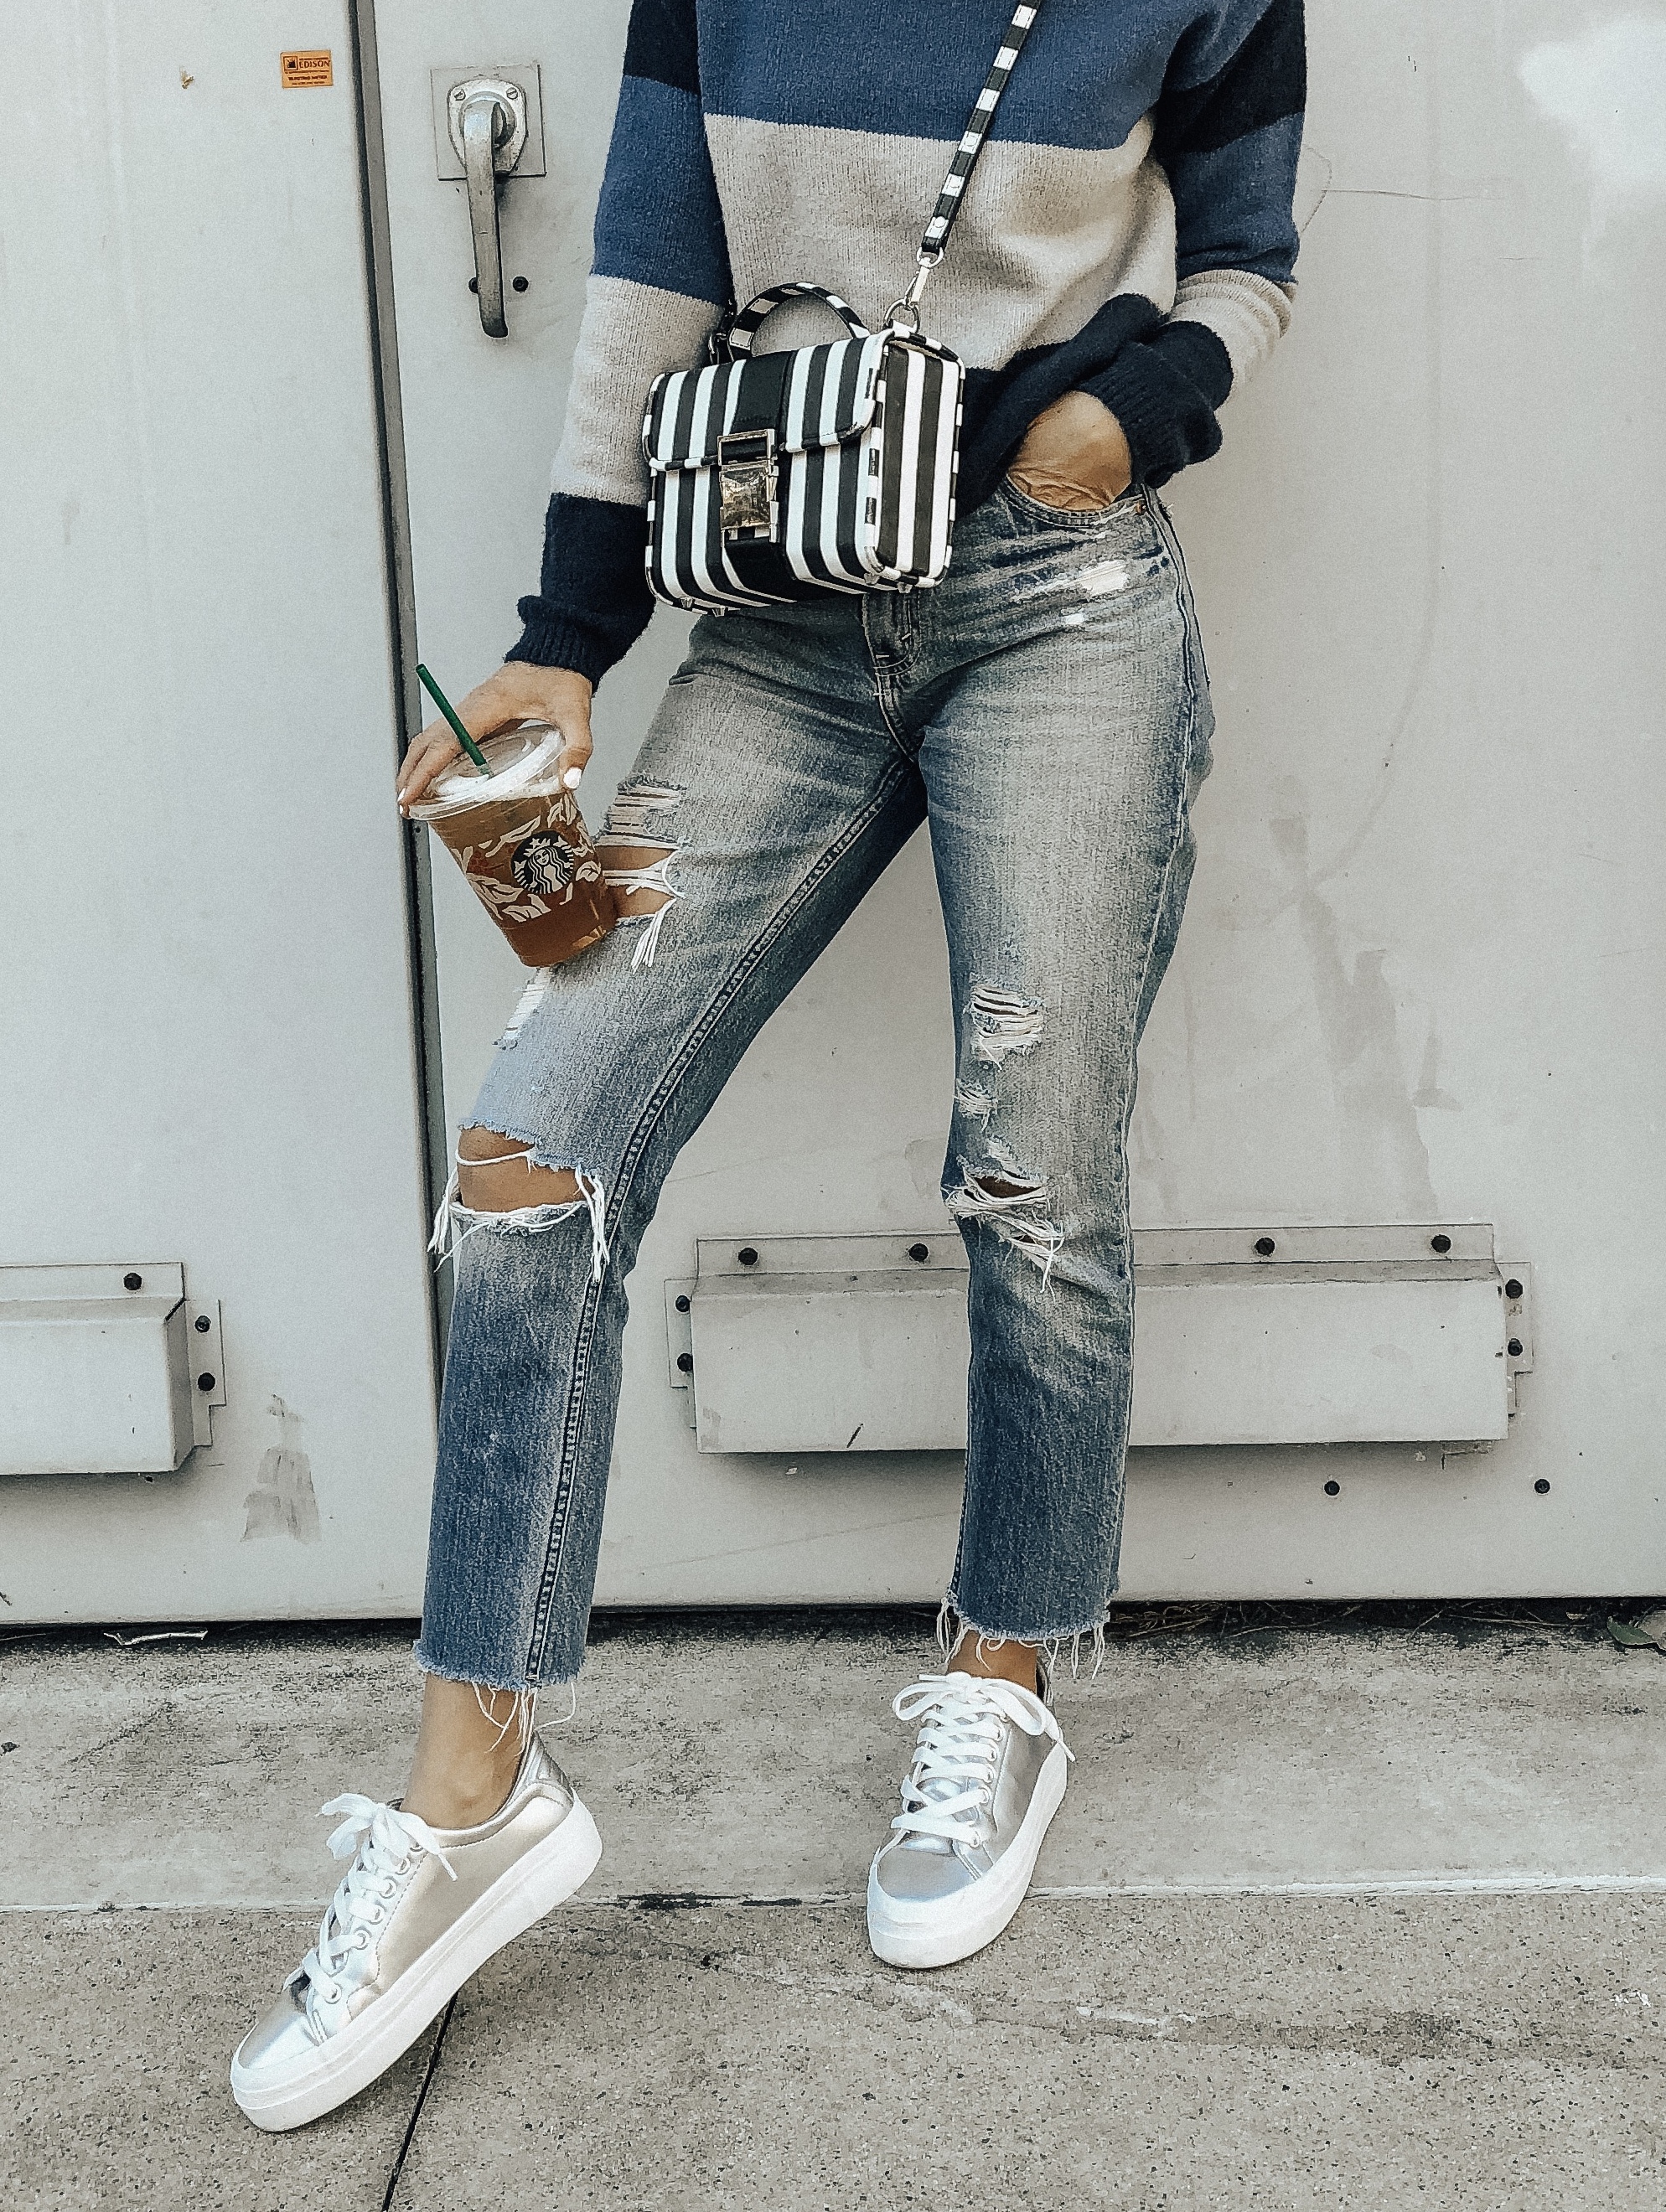 NOVEMBER TOP 10- Jaclyn De Leon Style + high rise mom jeans + abercrombie denim + distressed high rise jeans + casual street style + platform sneakers + mom style + starbucks + striped sweater + what to buy this season + top selling items